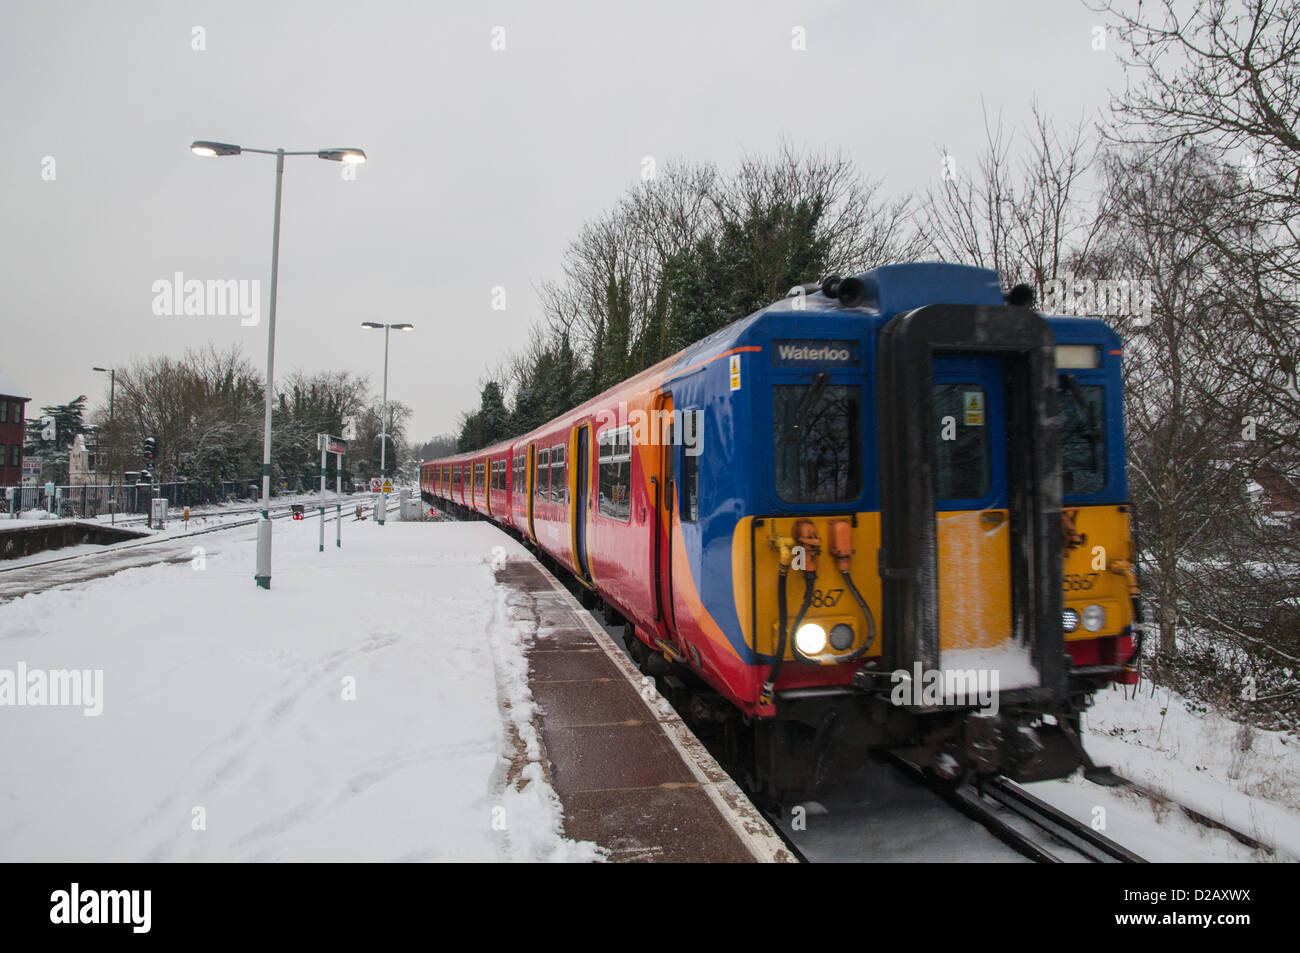 A South West Trains service to London Waterloo entering Platform 4 of Epsom Train Station in Surrey. Taken during the wintry weather on 18th Janurary 2013. Stock Photo